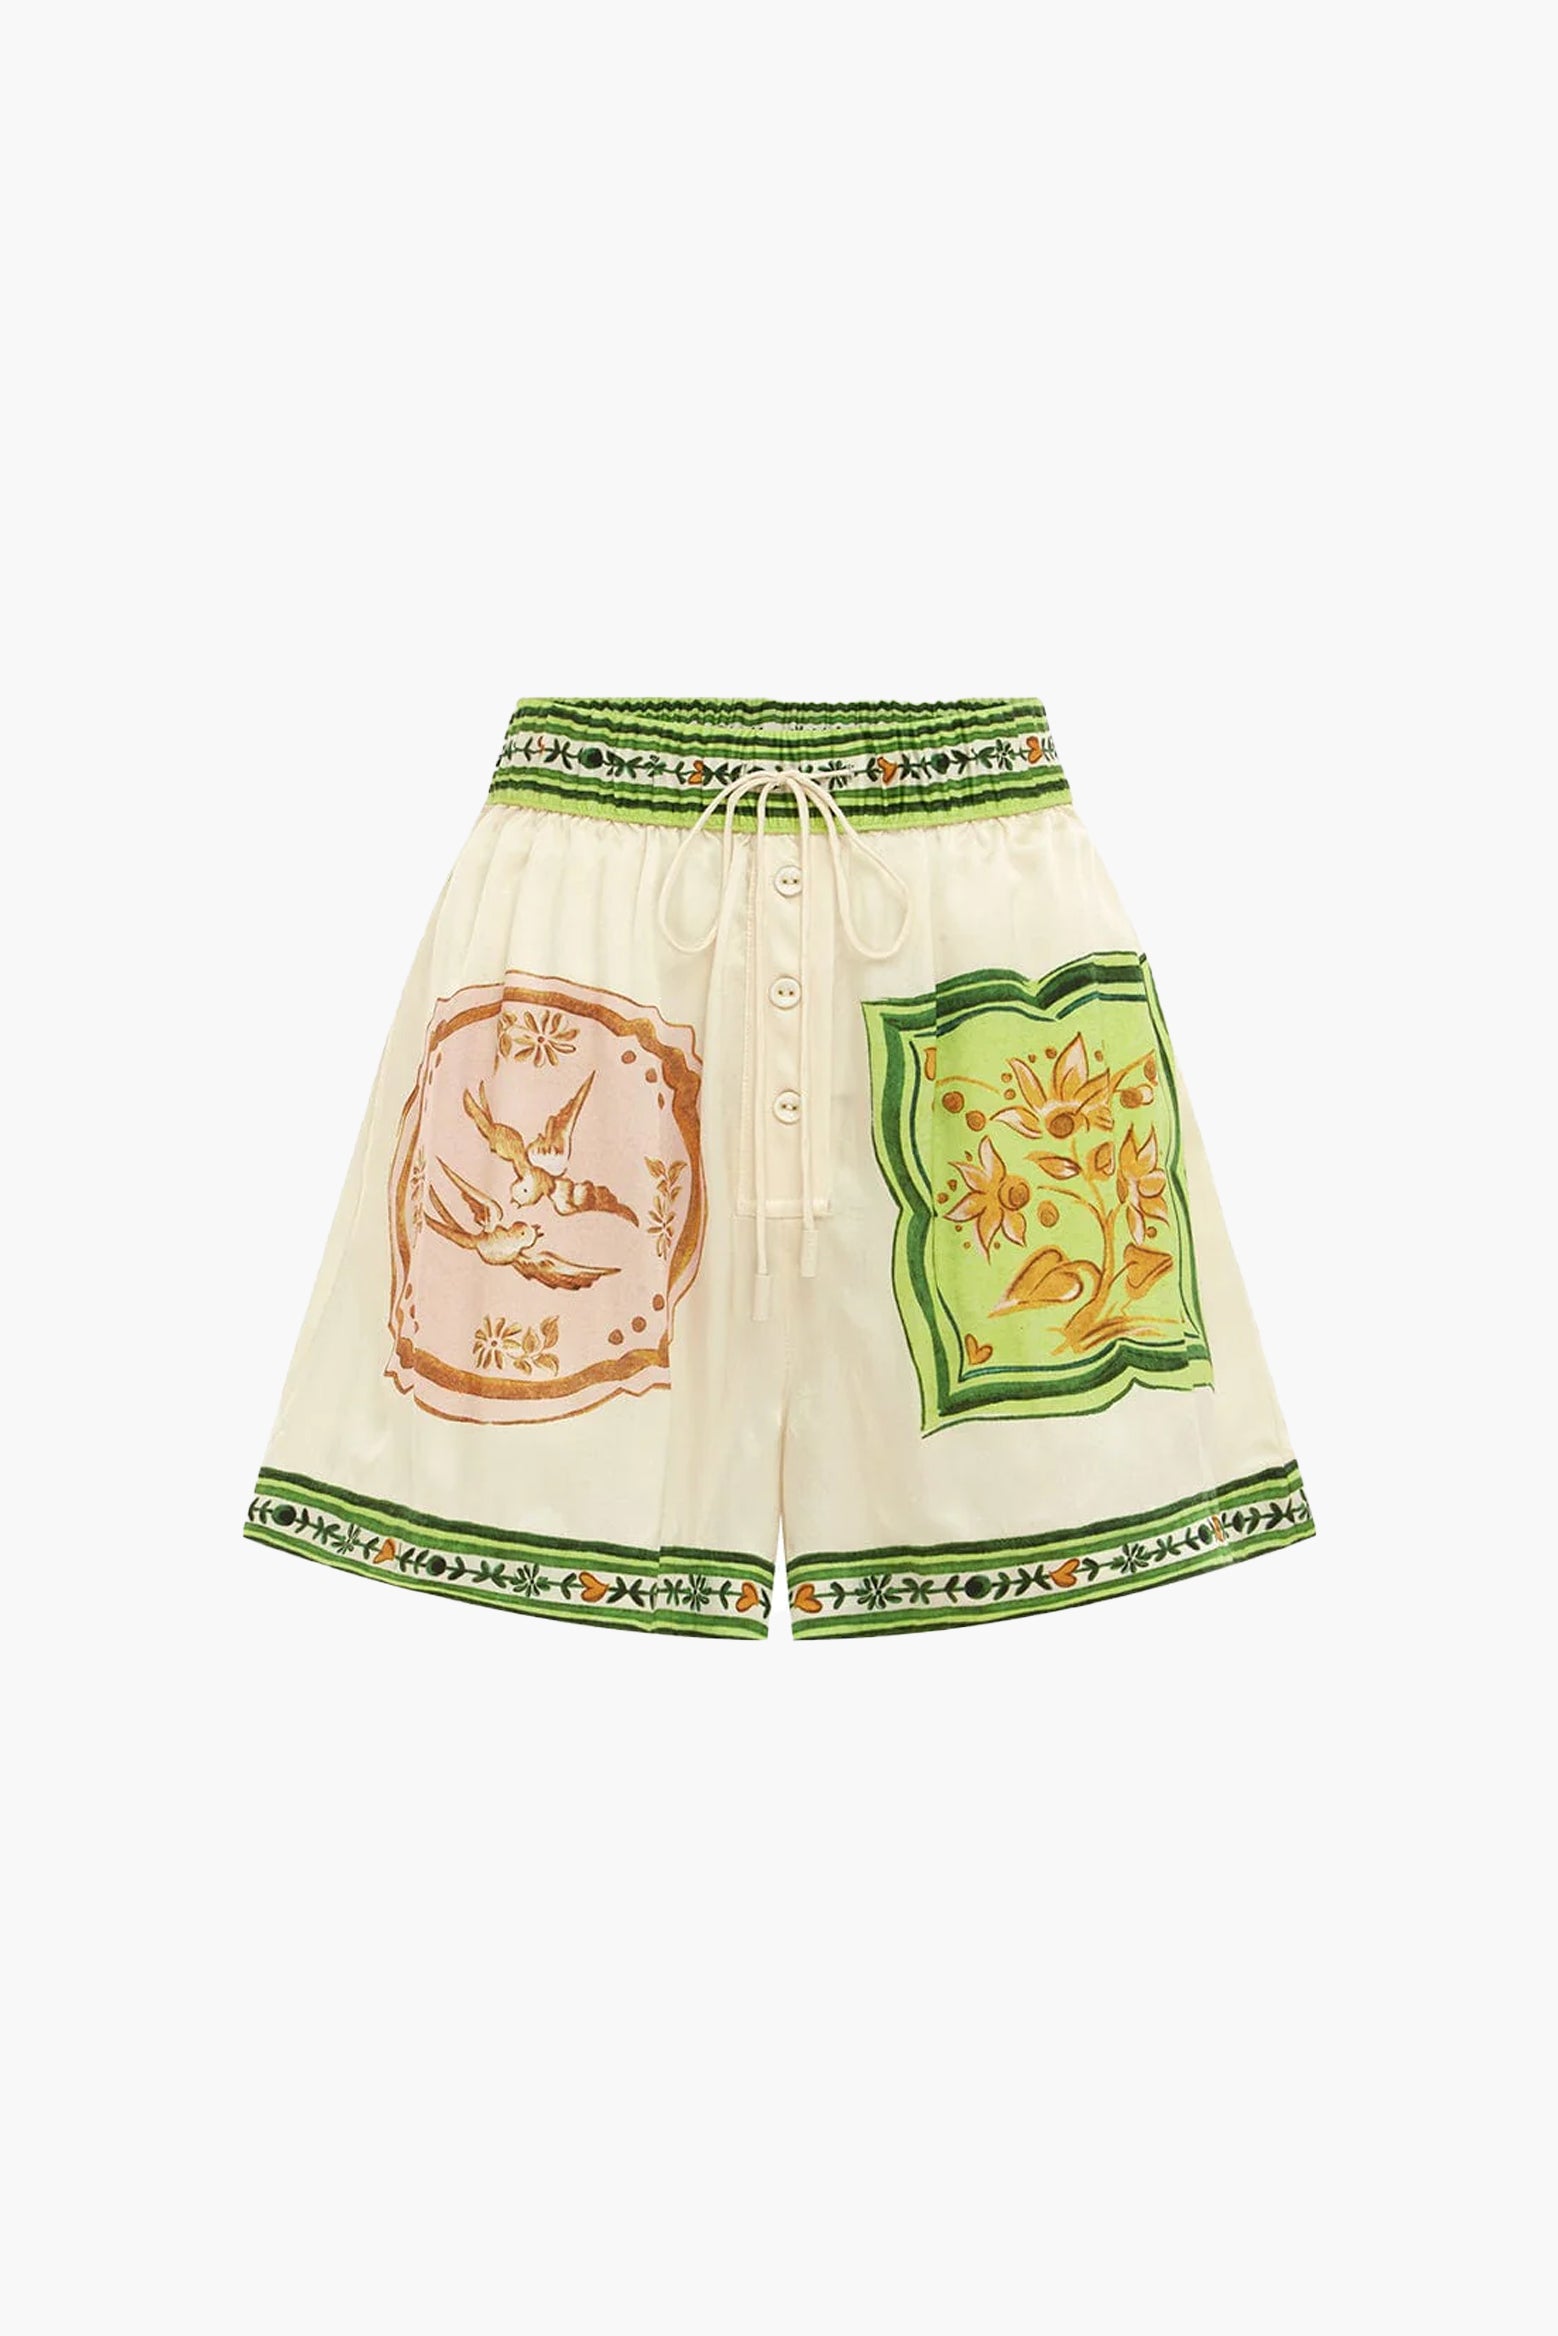 Alemais Procelain Silk Short in Cream available at The New Trend Australia. 